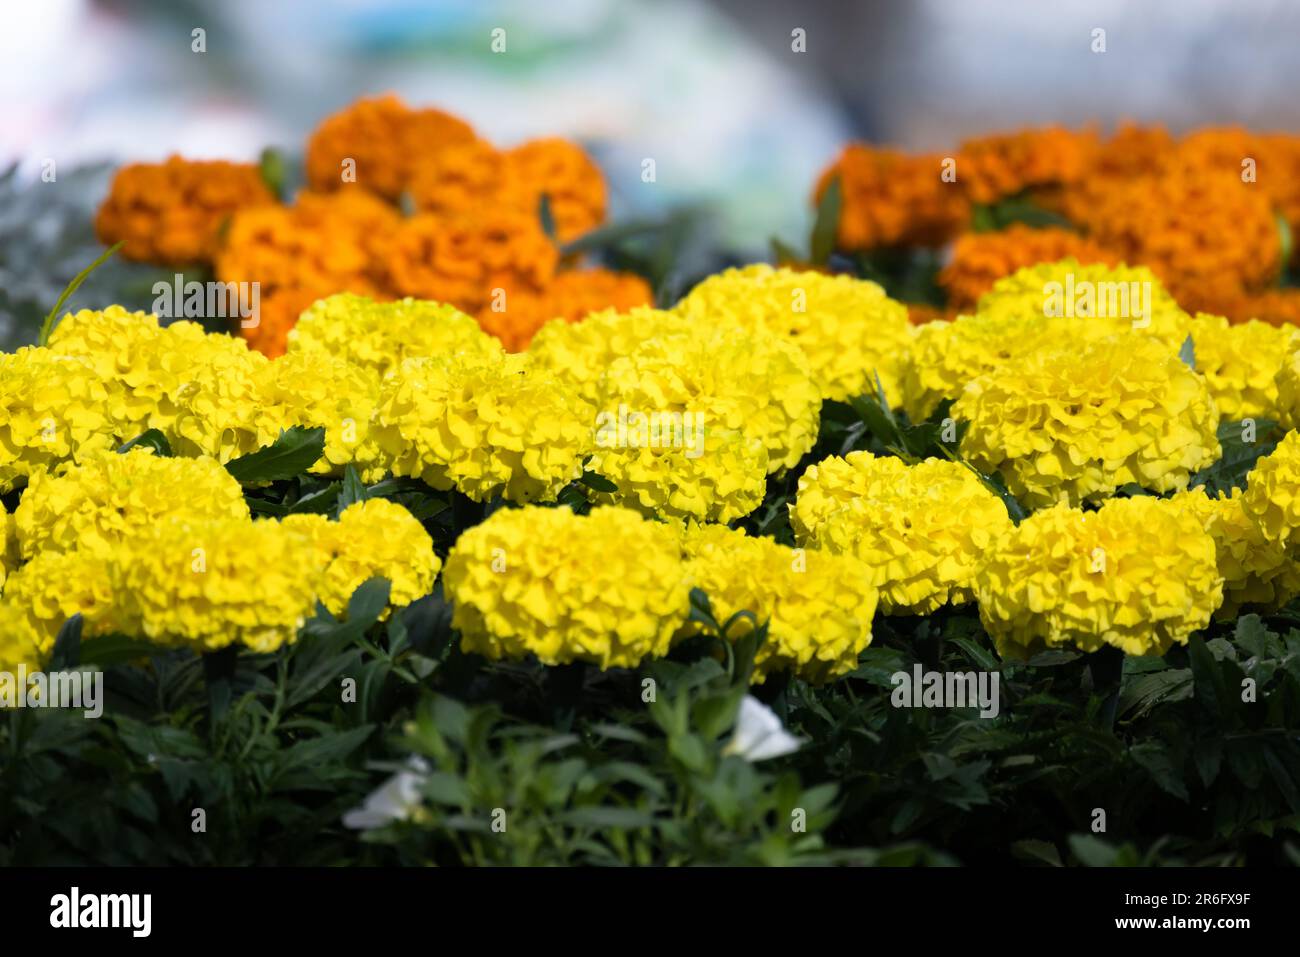 Decorative yellow and orange flowers over green leaves. Tagetes is a genus of annual or perennial, mostly herbaceous plants in the sunflower family As Stock Photo